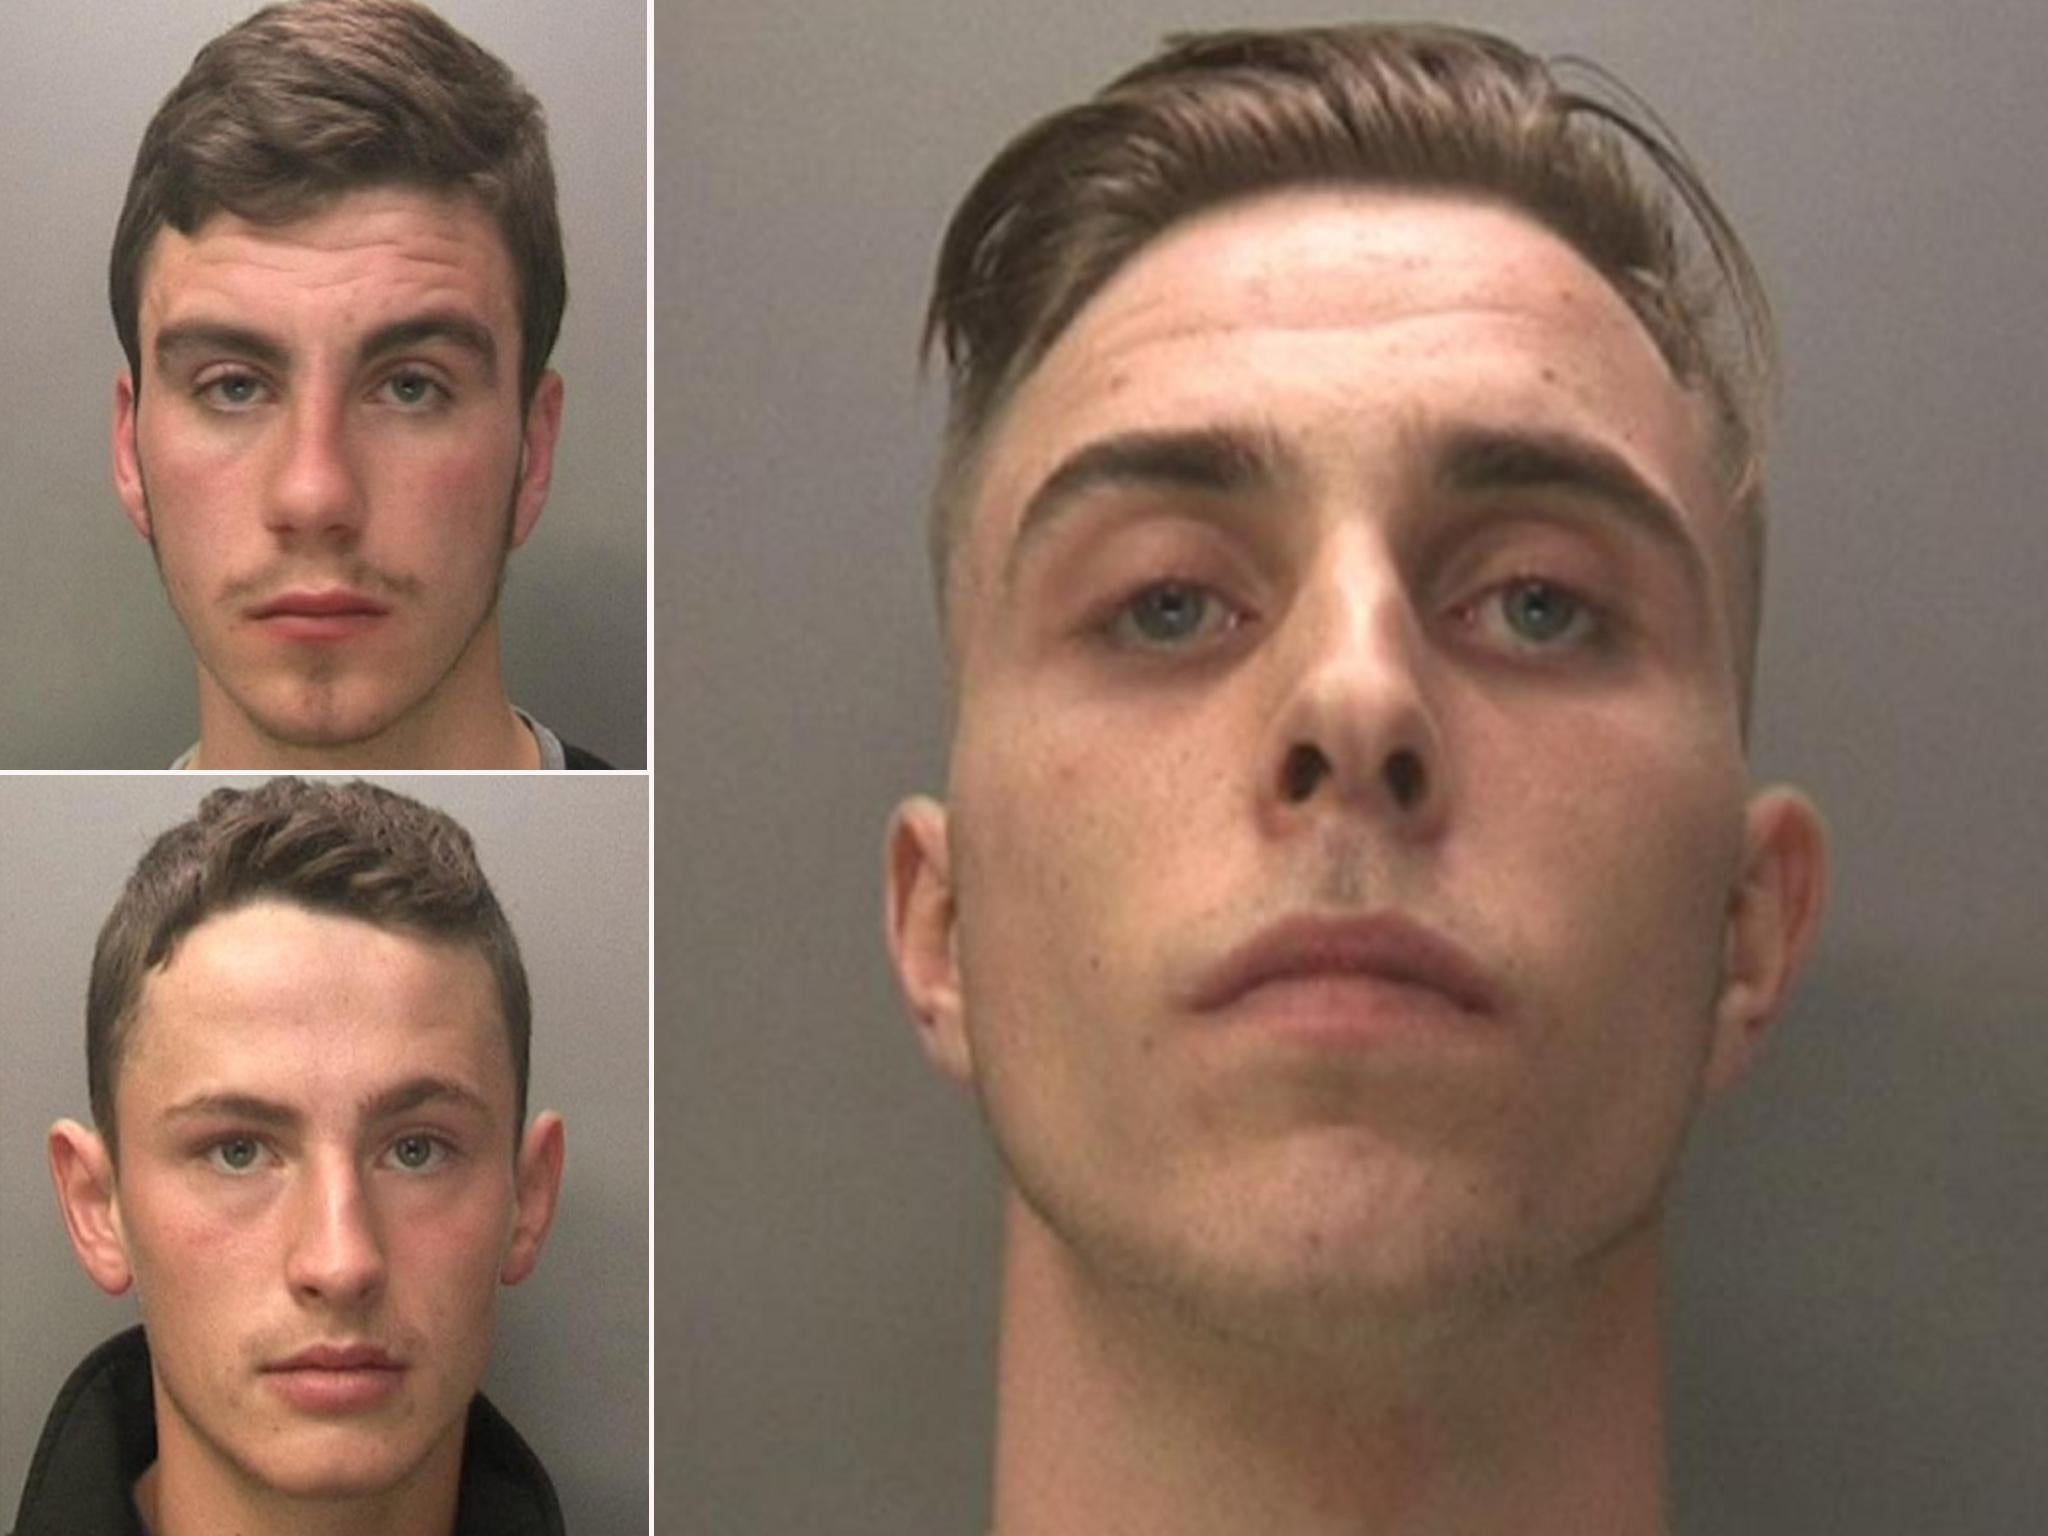 Clockwise from top left: Jack McInally, Jake Cairns, Brandon Sharples. The men have been found guilty of sexually exploiting a 14-year-old girl in Coventry